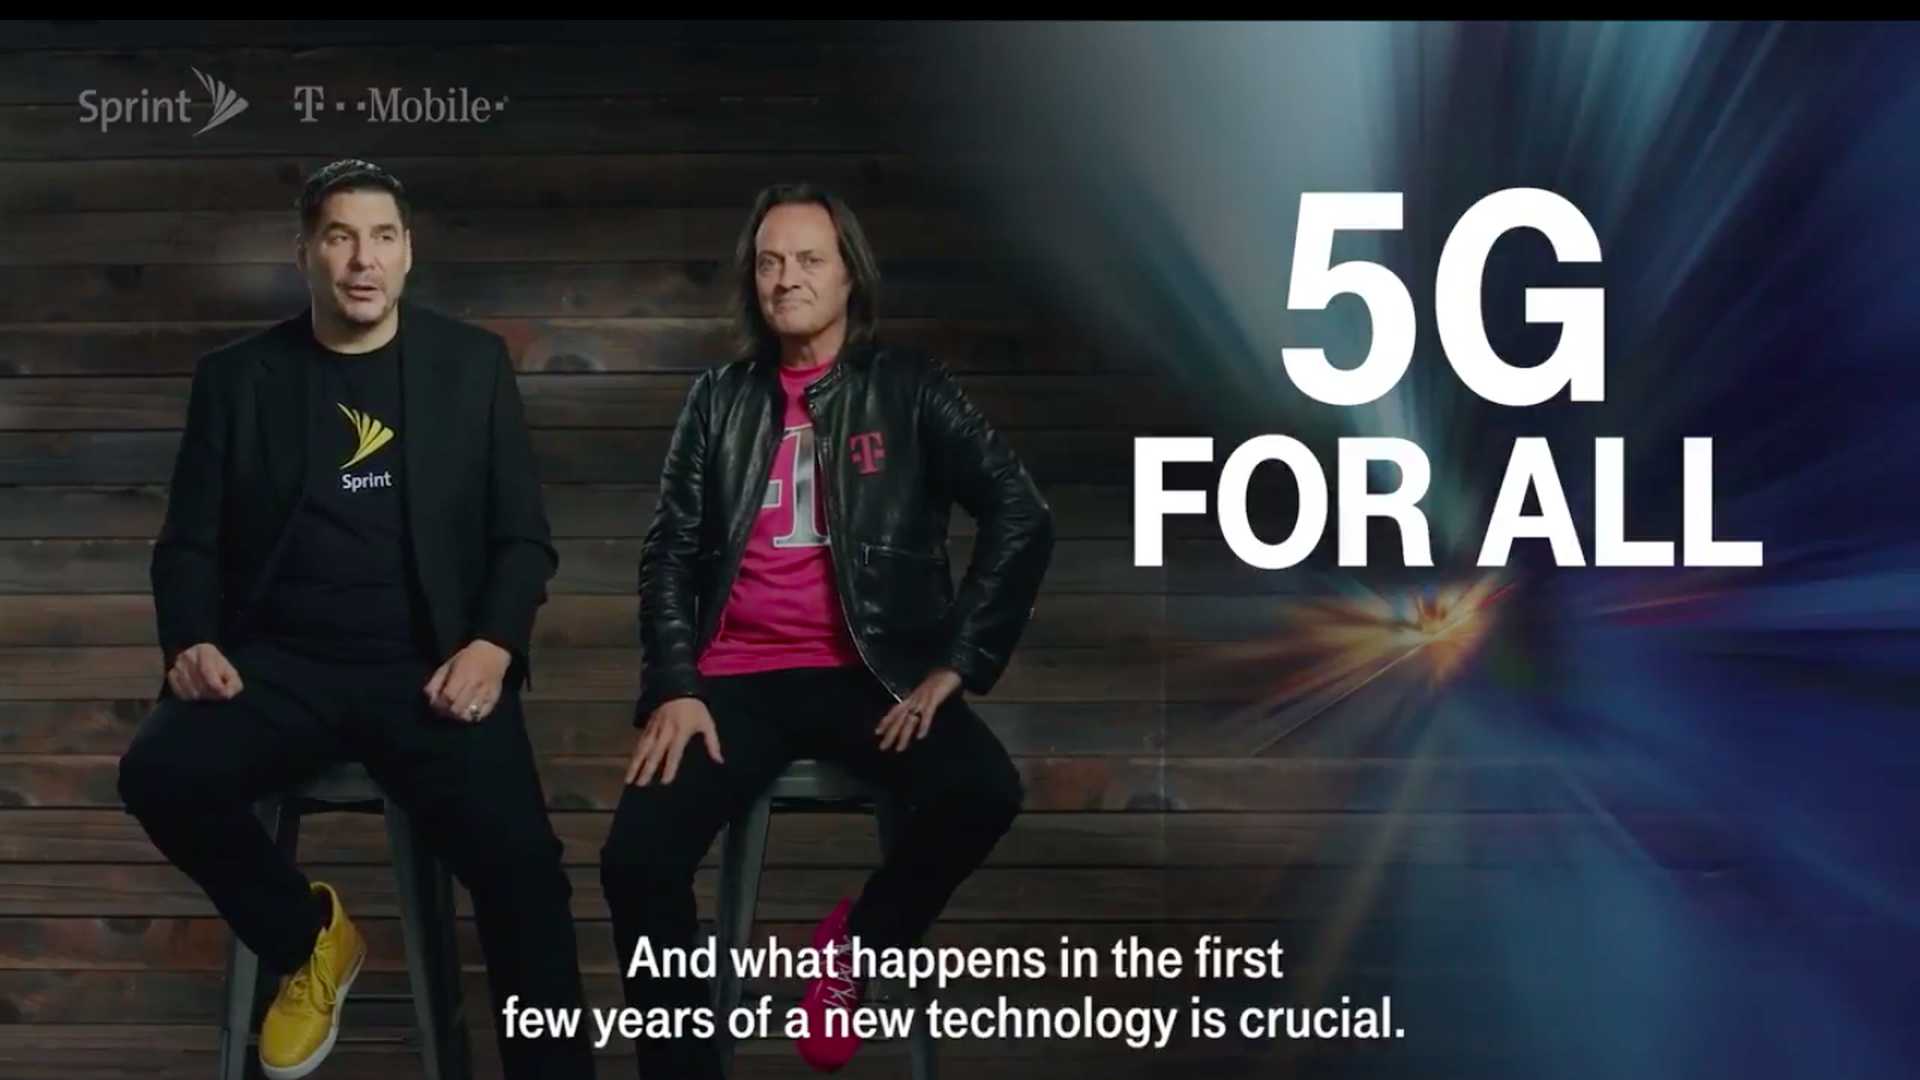 Sprint and T-Mobile CEOs sit on chairs next to a big graphic that says 5G for all